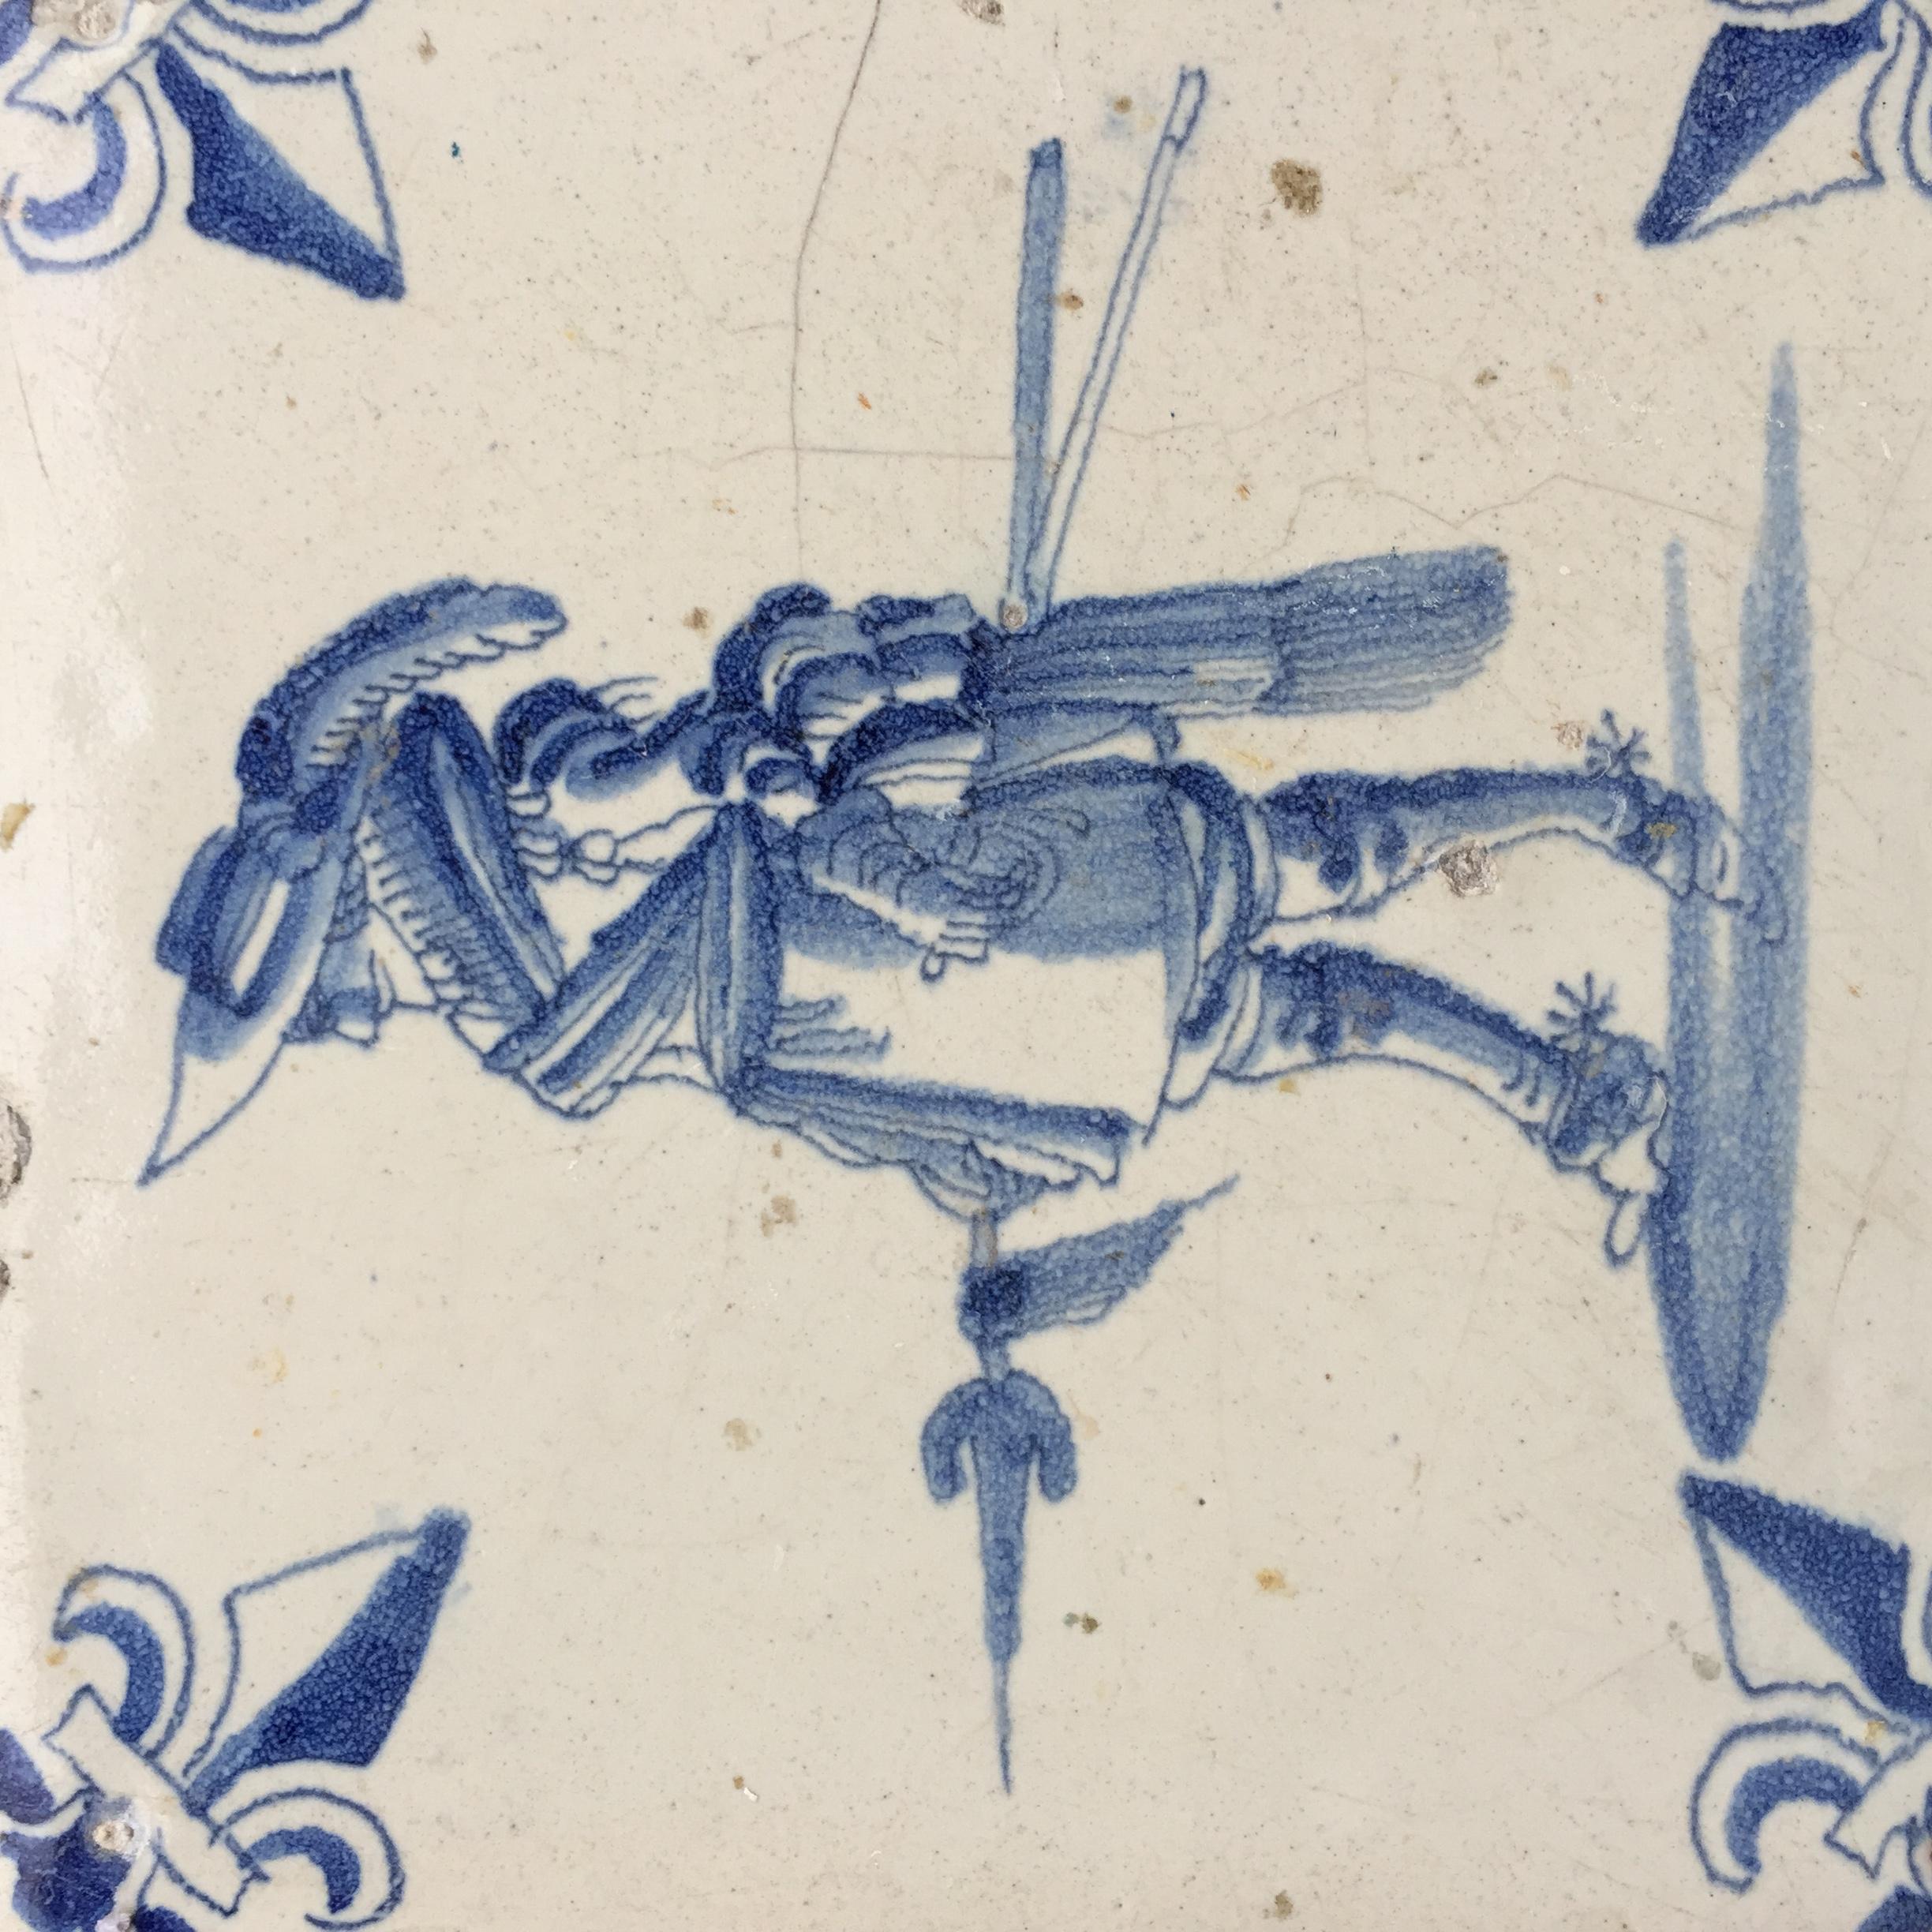 The Netherlands
Amsterdam
Circa 1625 – 1650

A blue and white Dutch tile with a decoration of a Dutch soldier from the period of the 80 Years War. This soldier could be a member of the civil guard, and is probably wearing a ceremonial costume. He is